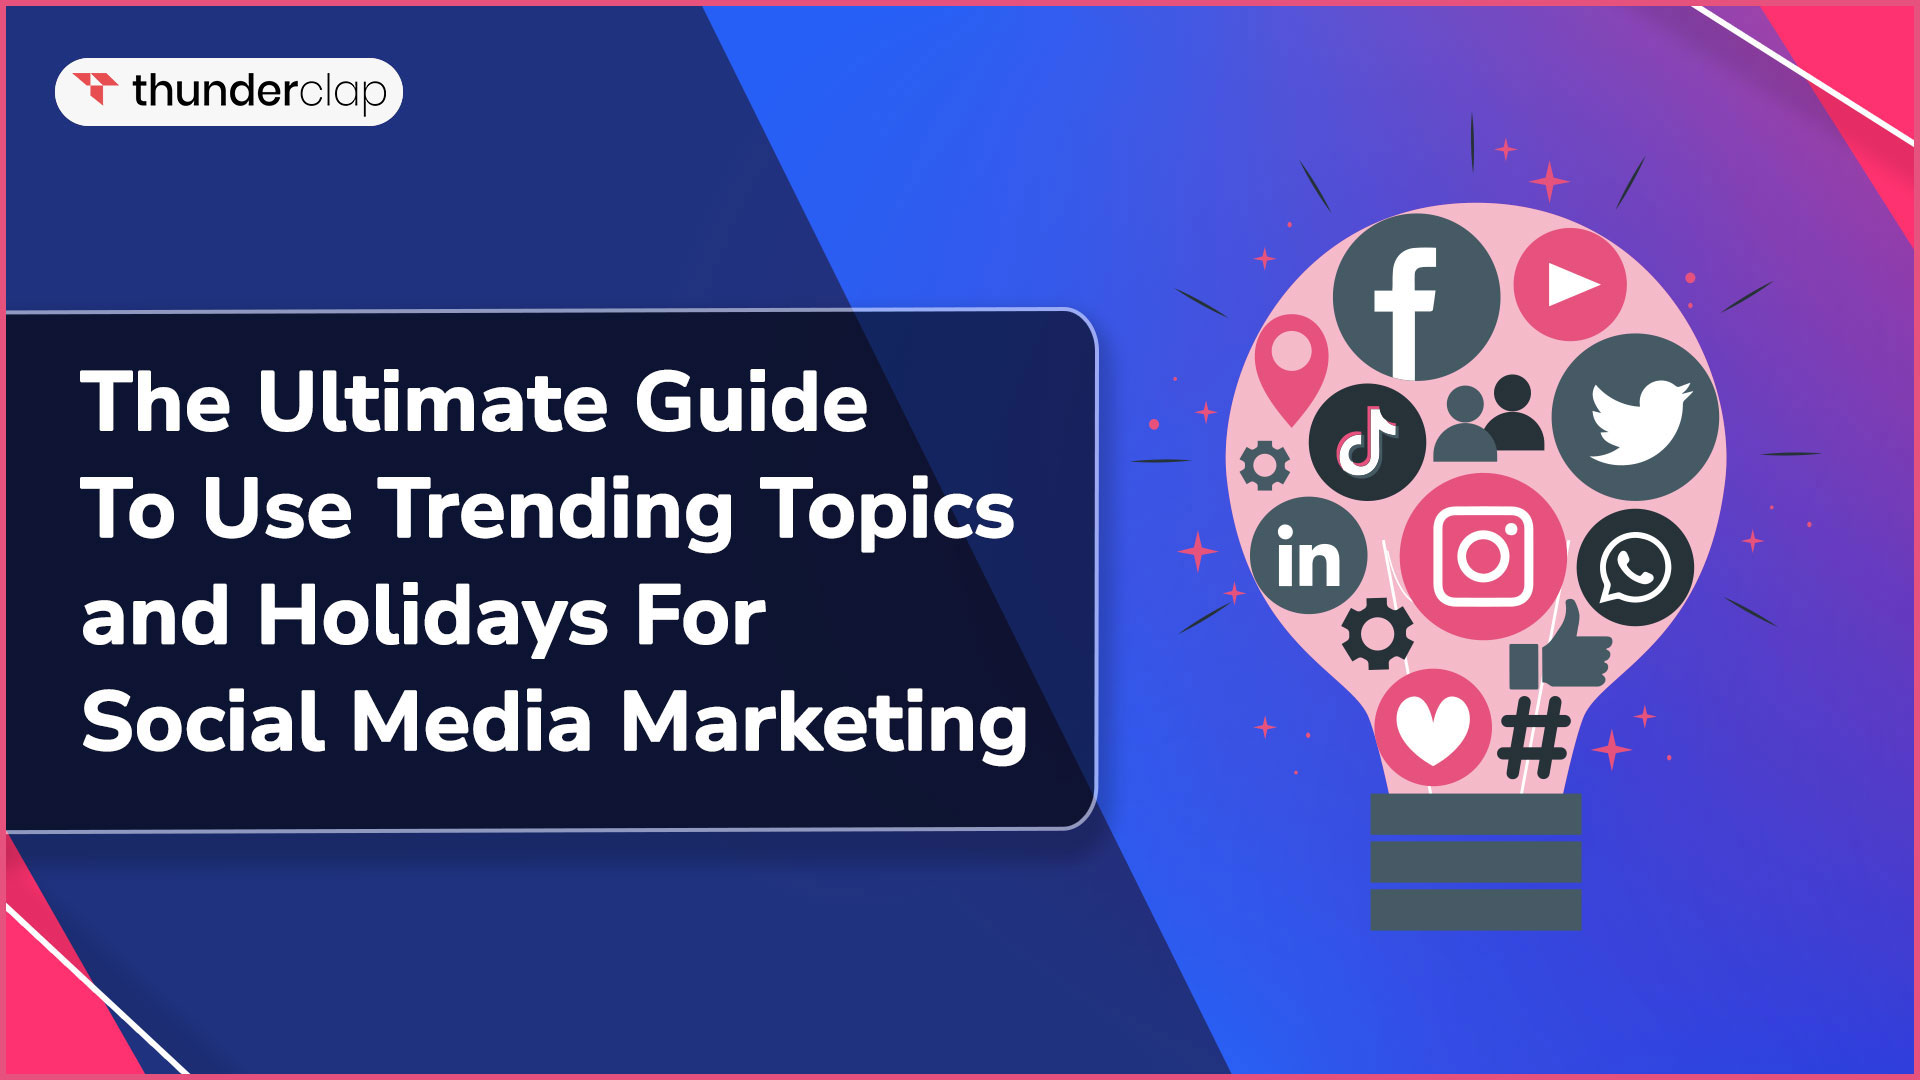 Guide To Use Trending Topics and Holidays For Social Media Marketing